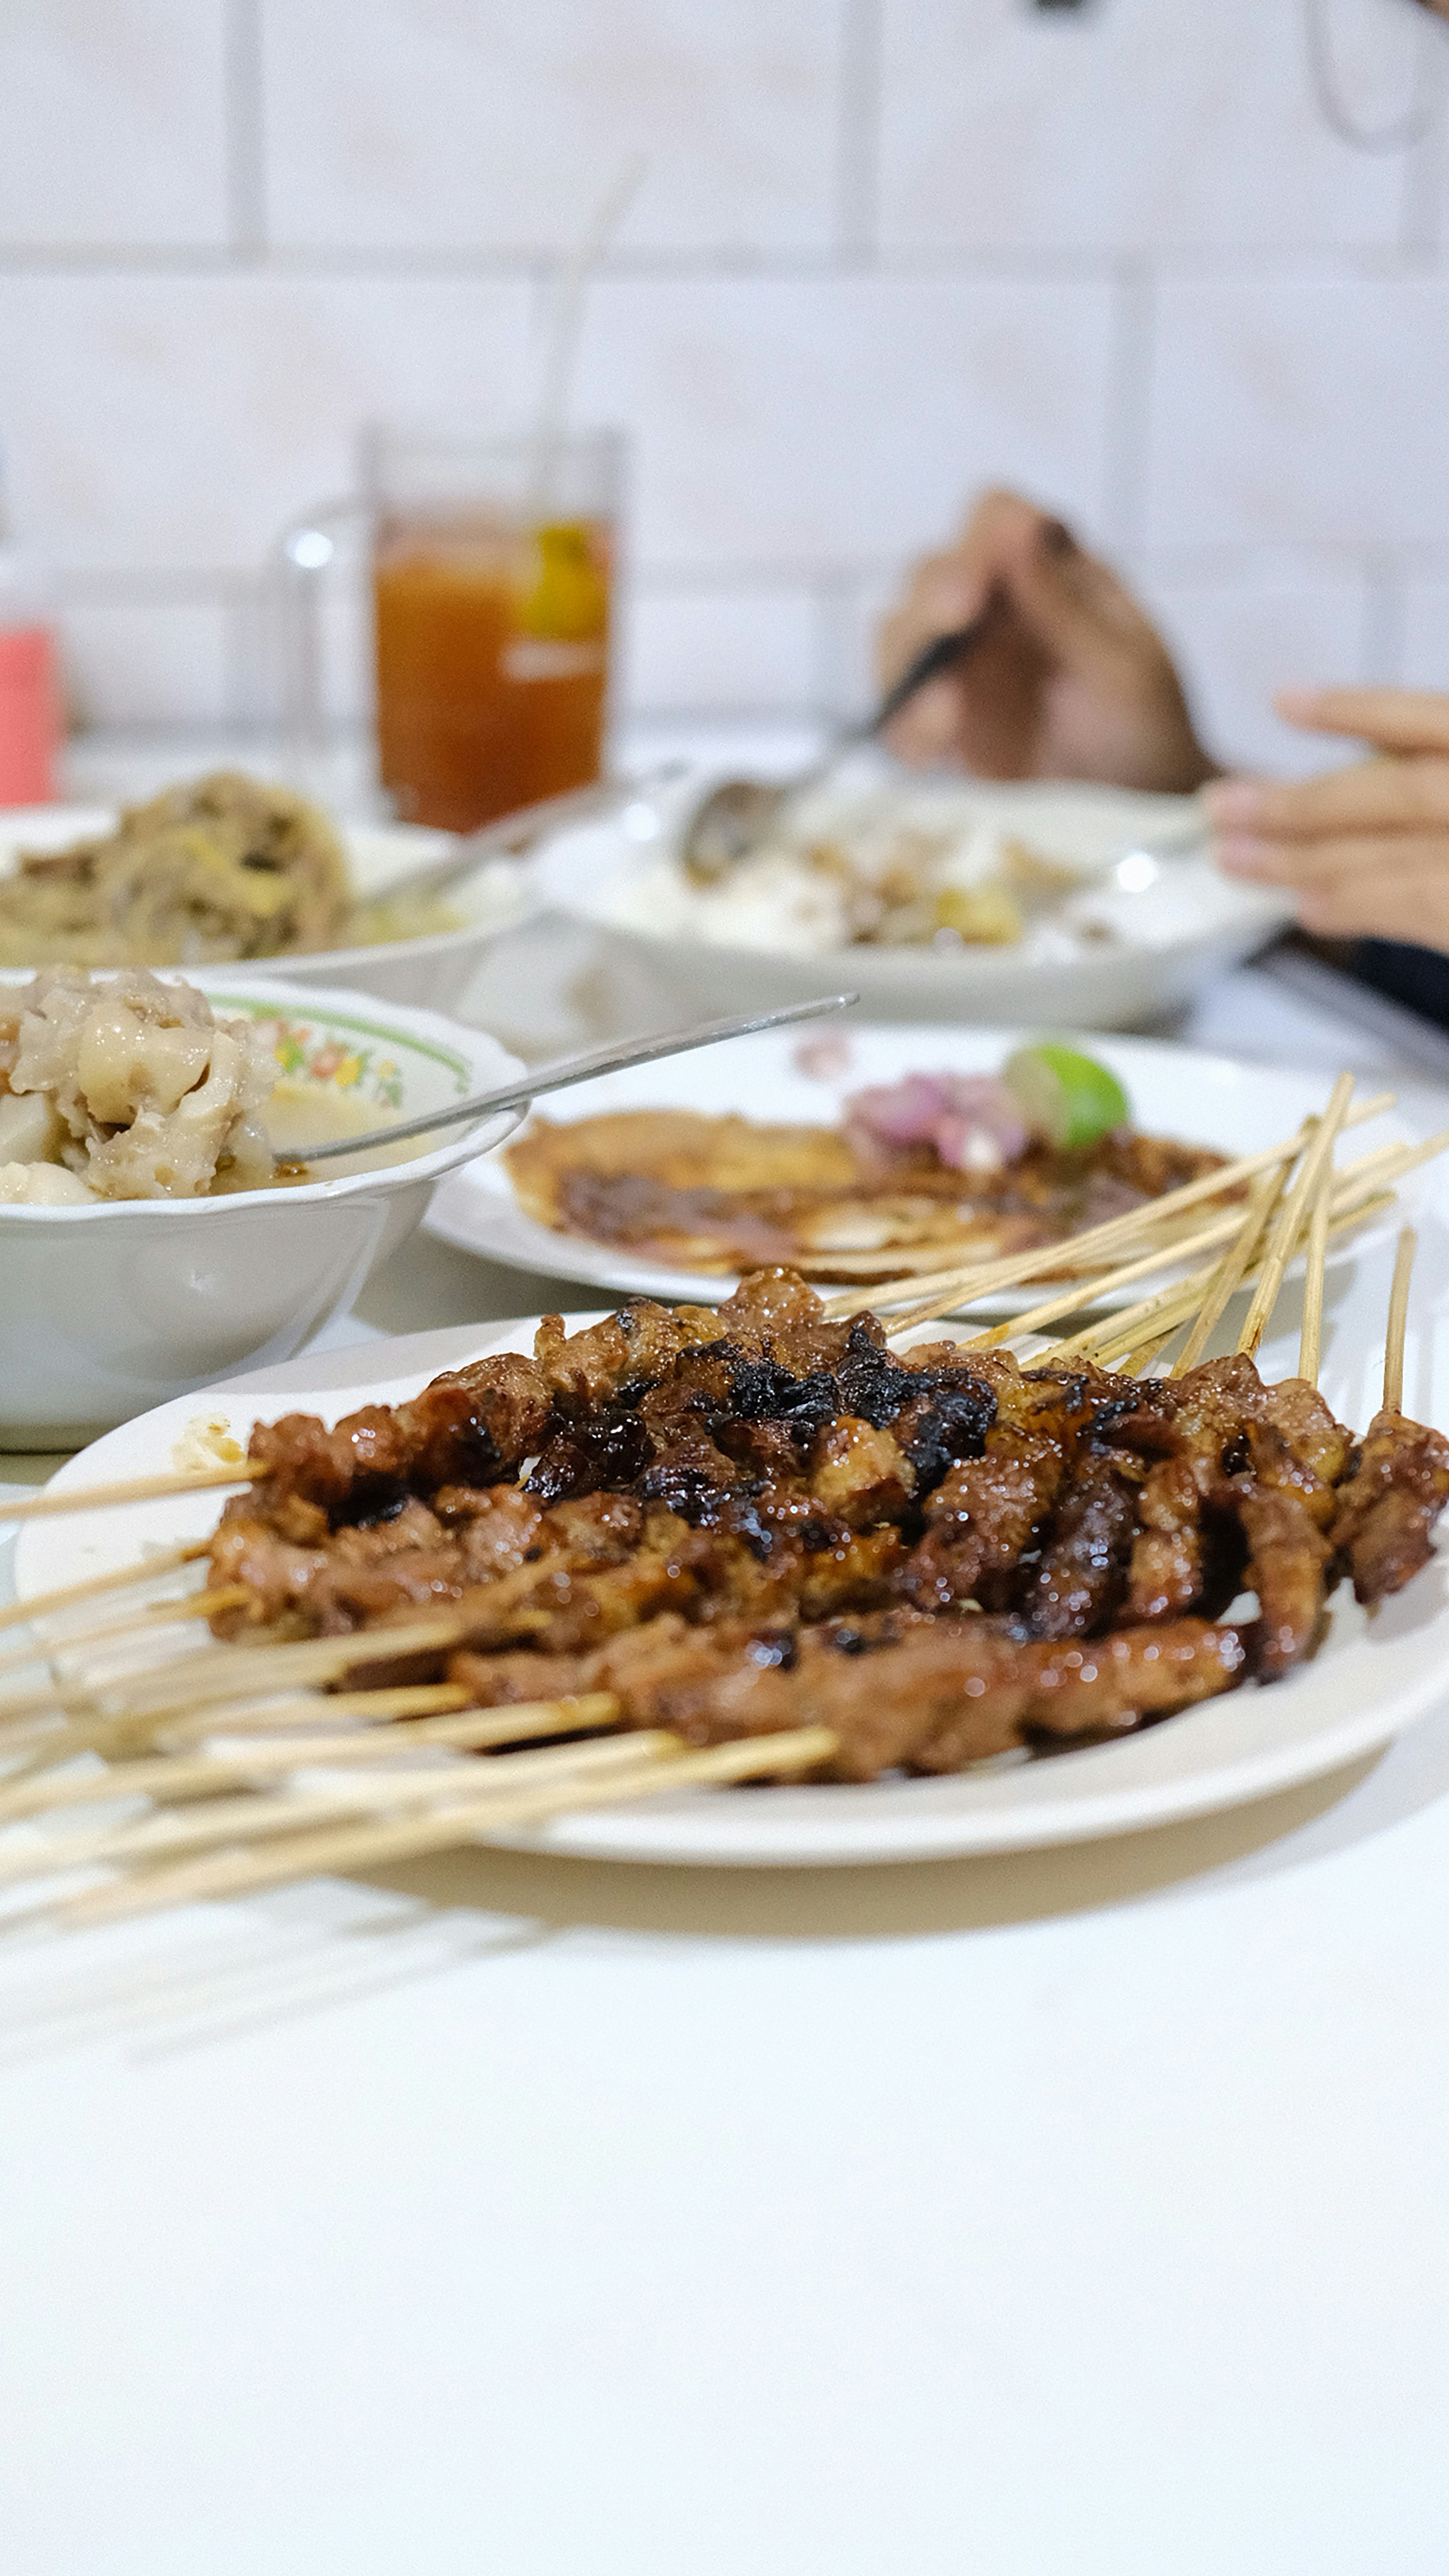 Chicken satay is one of the foods that must be tried if you go to Indonesia. Most satay is made from goat meat, but some people don't like the smell. Therefore, chicken satay is one of the alternative choices